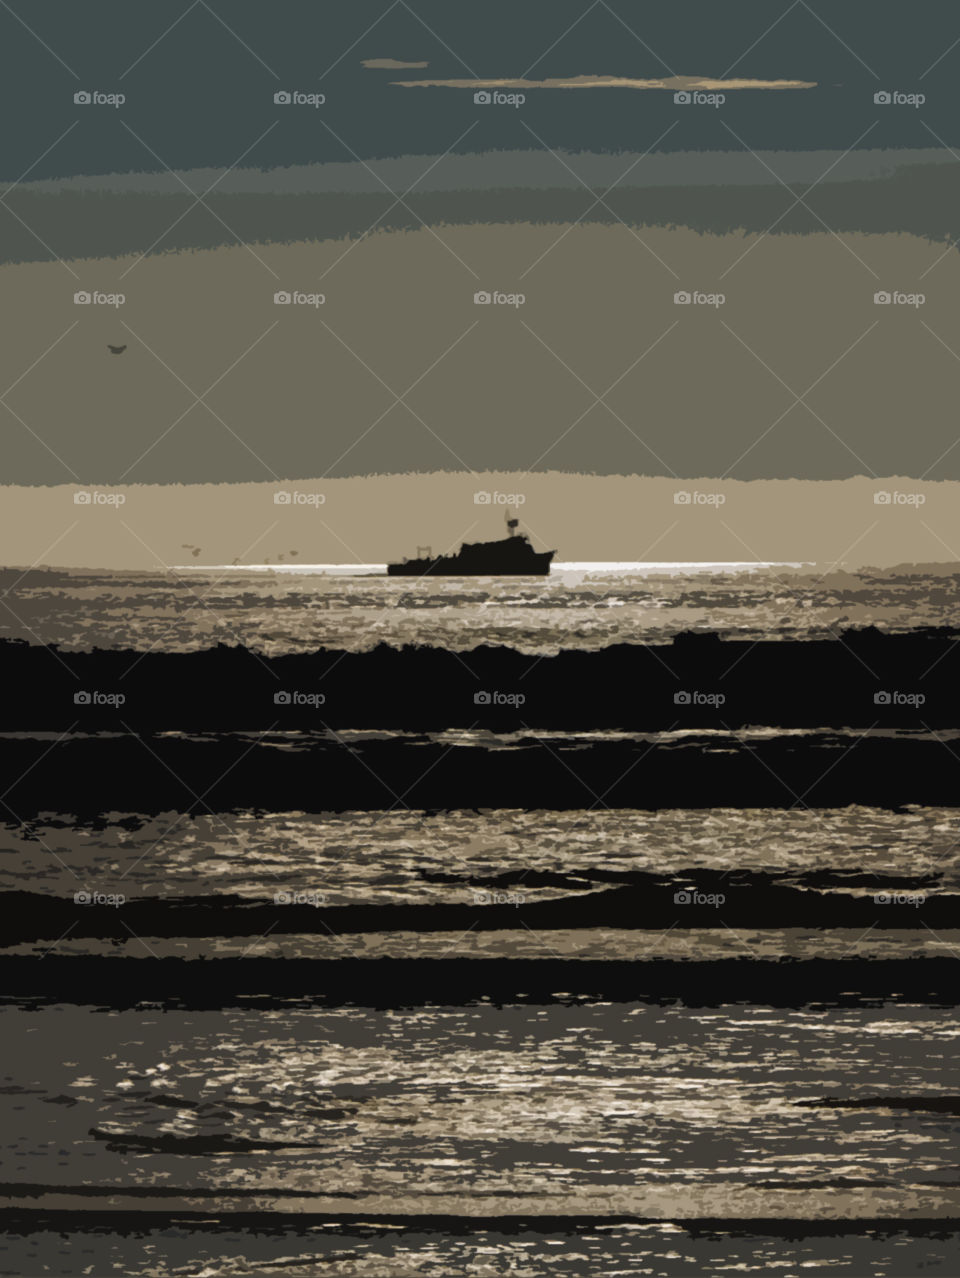 Out Fishing. I took this photo off the shore in Oceanside, Ca. Zoomed in and cropped because I do not have a long enough lens. Painted look given with the cutout filter in CS6